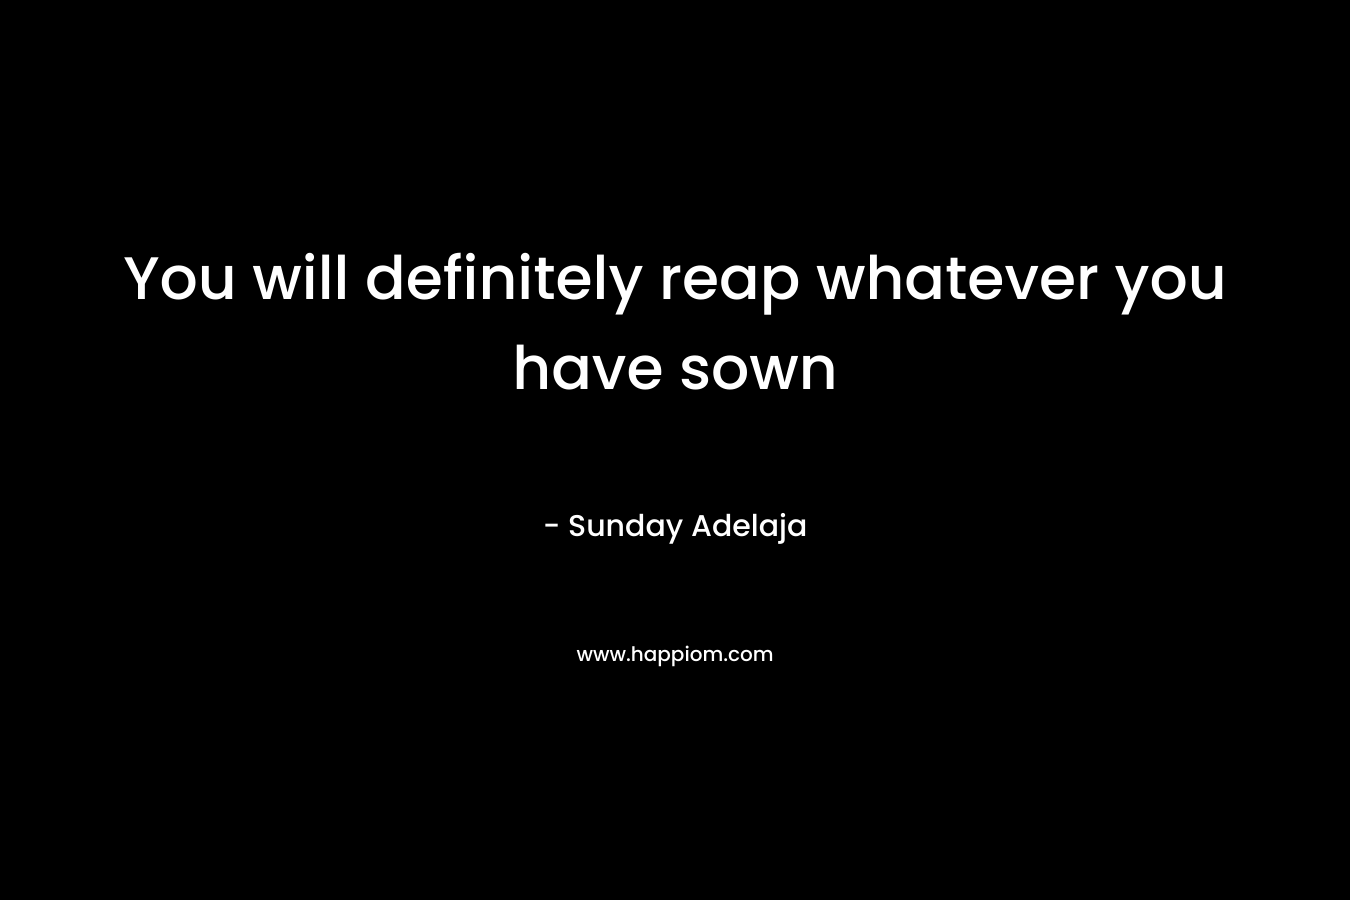 You will definitely reap whatever you have sown